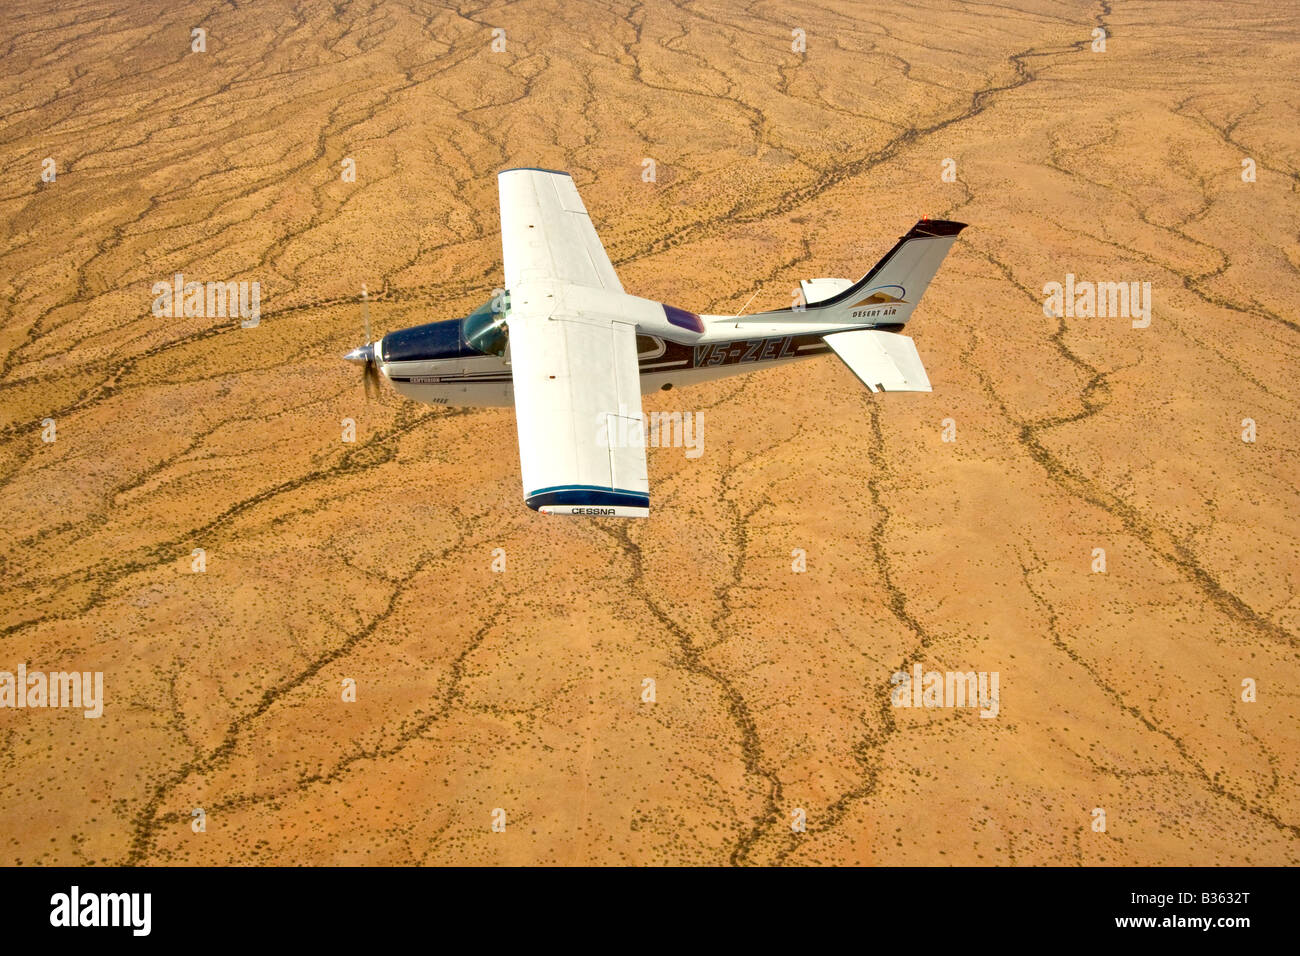 Aerial view of desert landscape of north central Namibia Africa with a small airplane in view Stock Photo